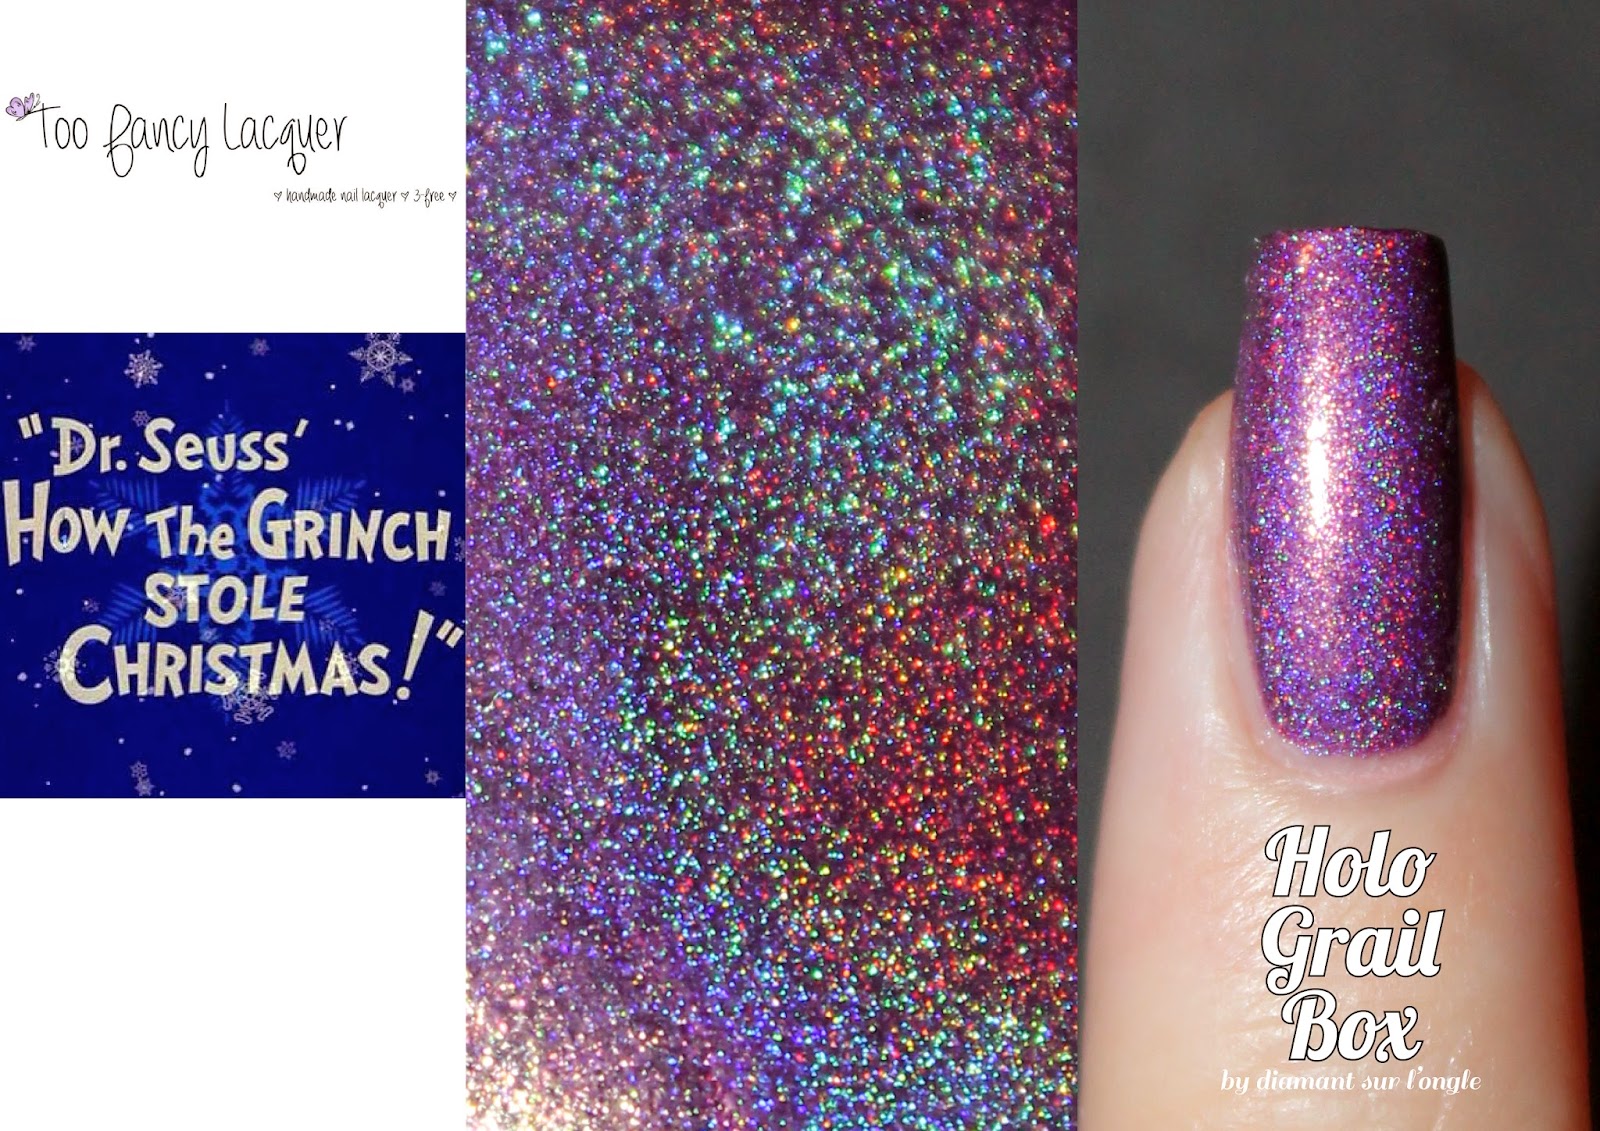 Holo Grail Box December 2014 : The Grinch Who Stole Christmas